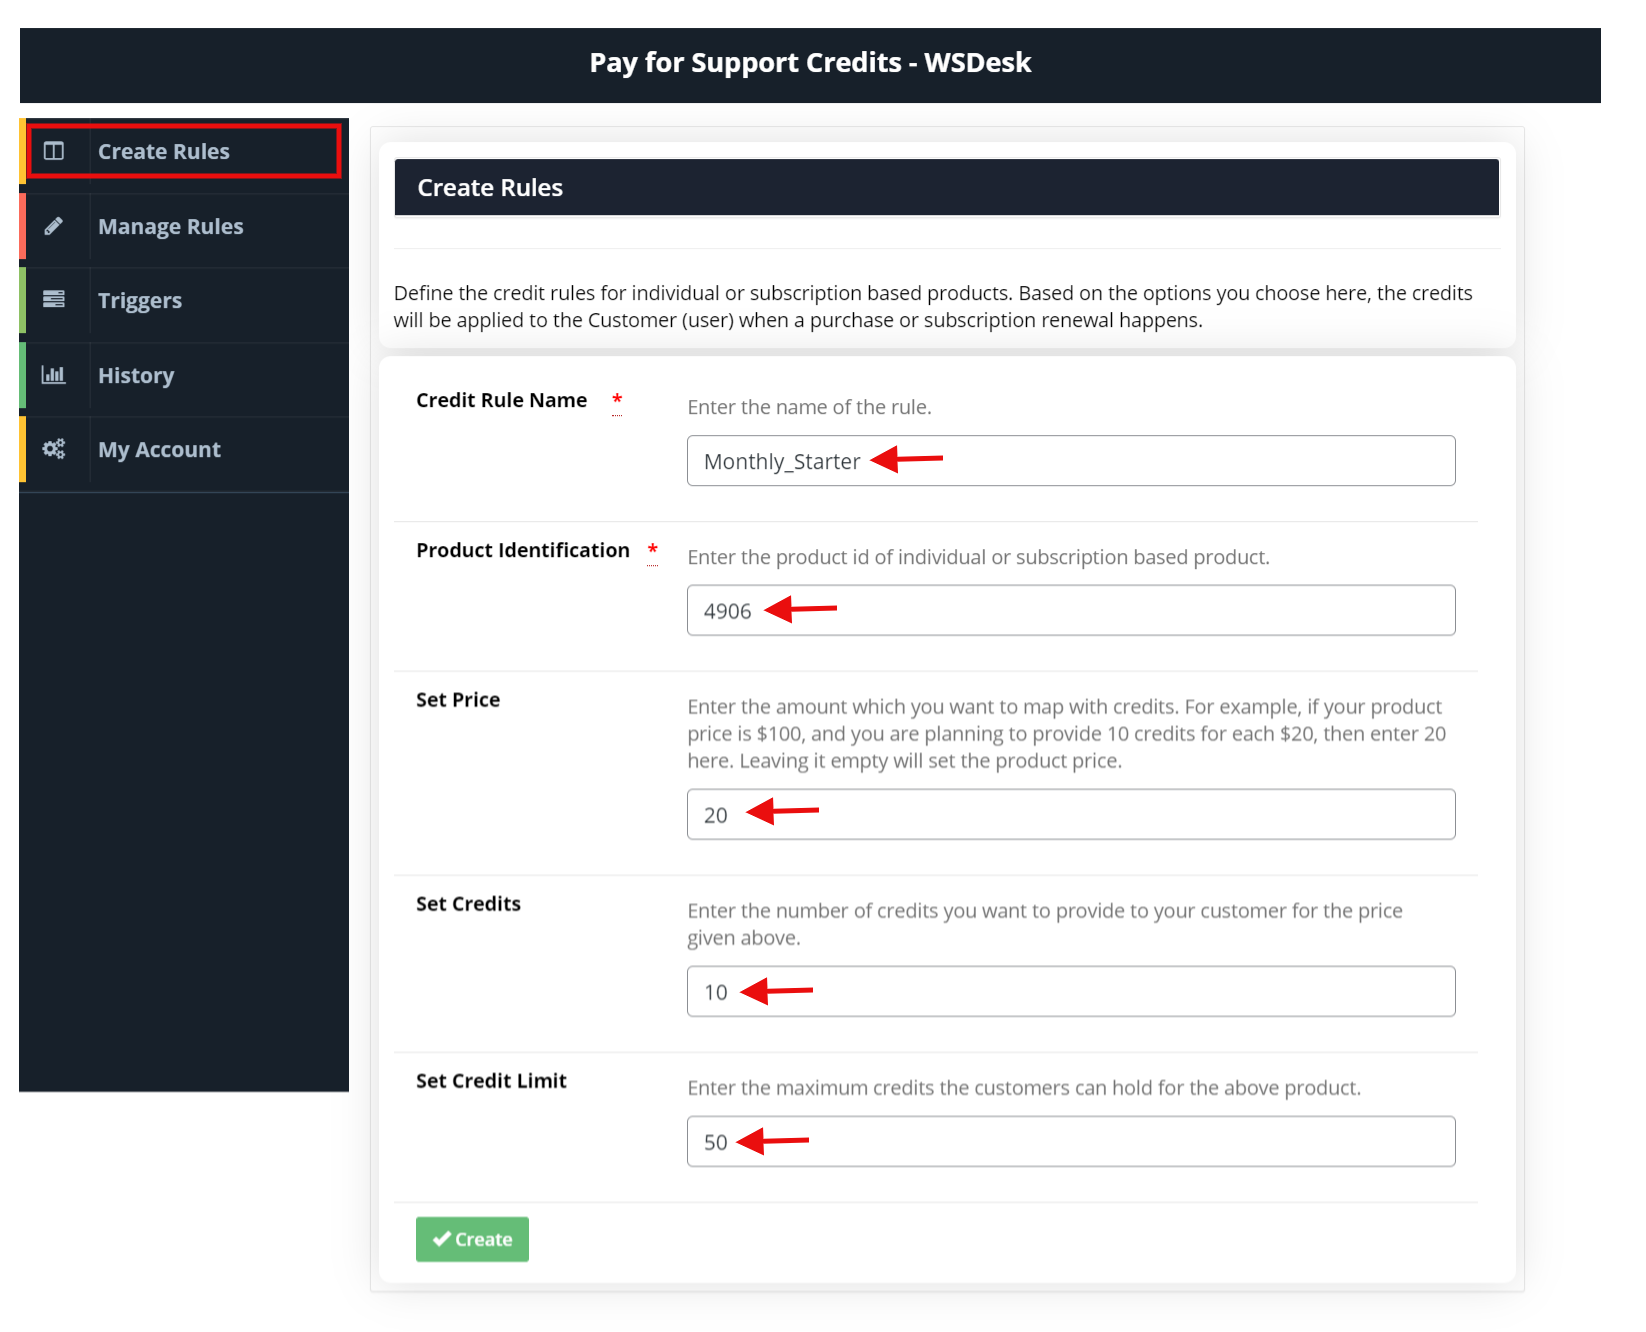 pay for support create rules | charge for Customer Support